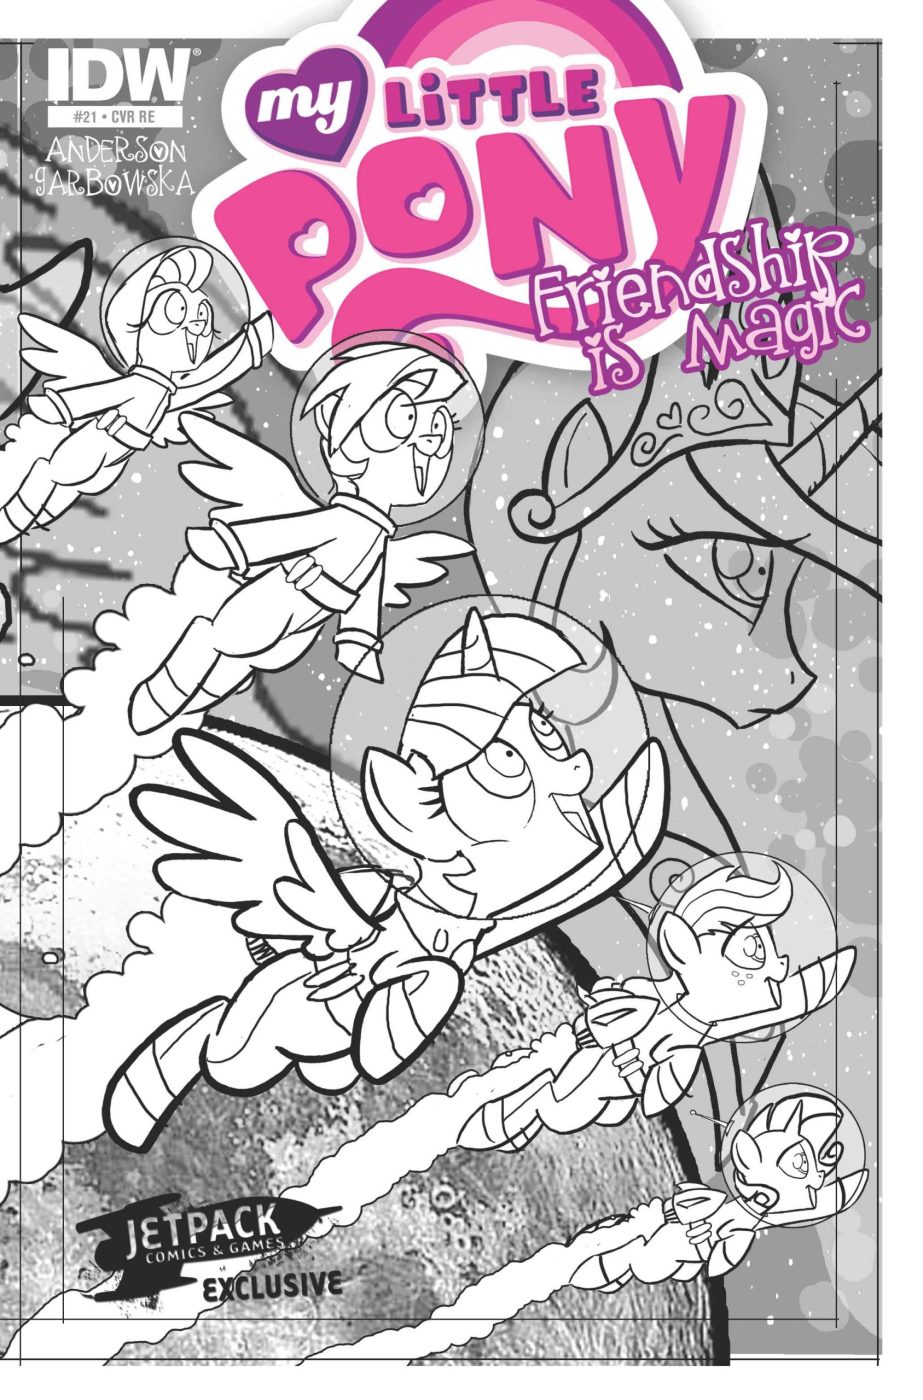 My Little Pony Friendship is Magic #21 (Limited Edition Micro Print Cover)